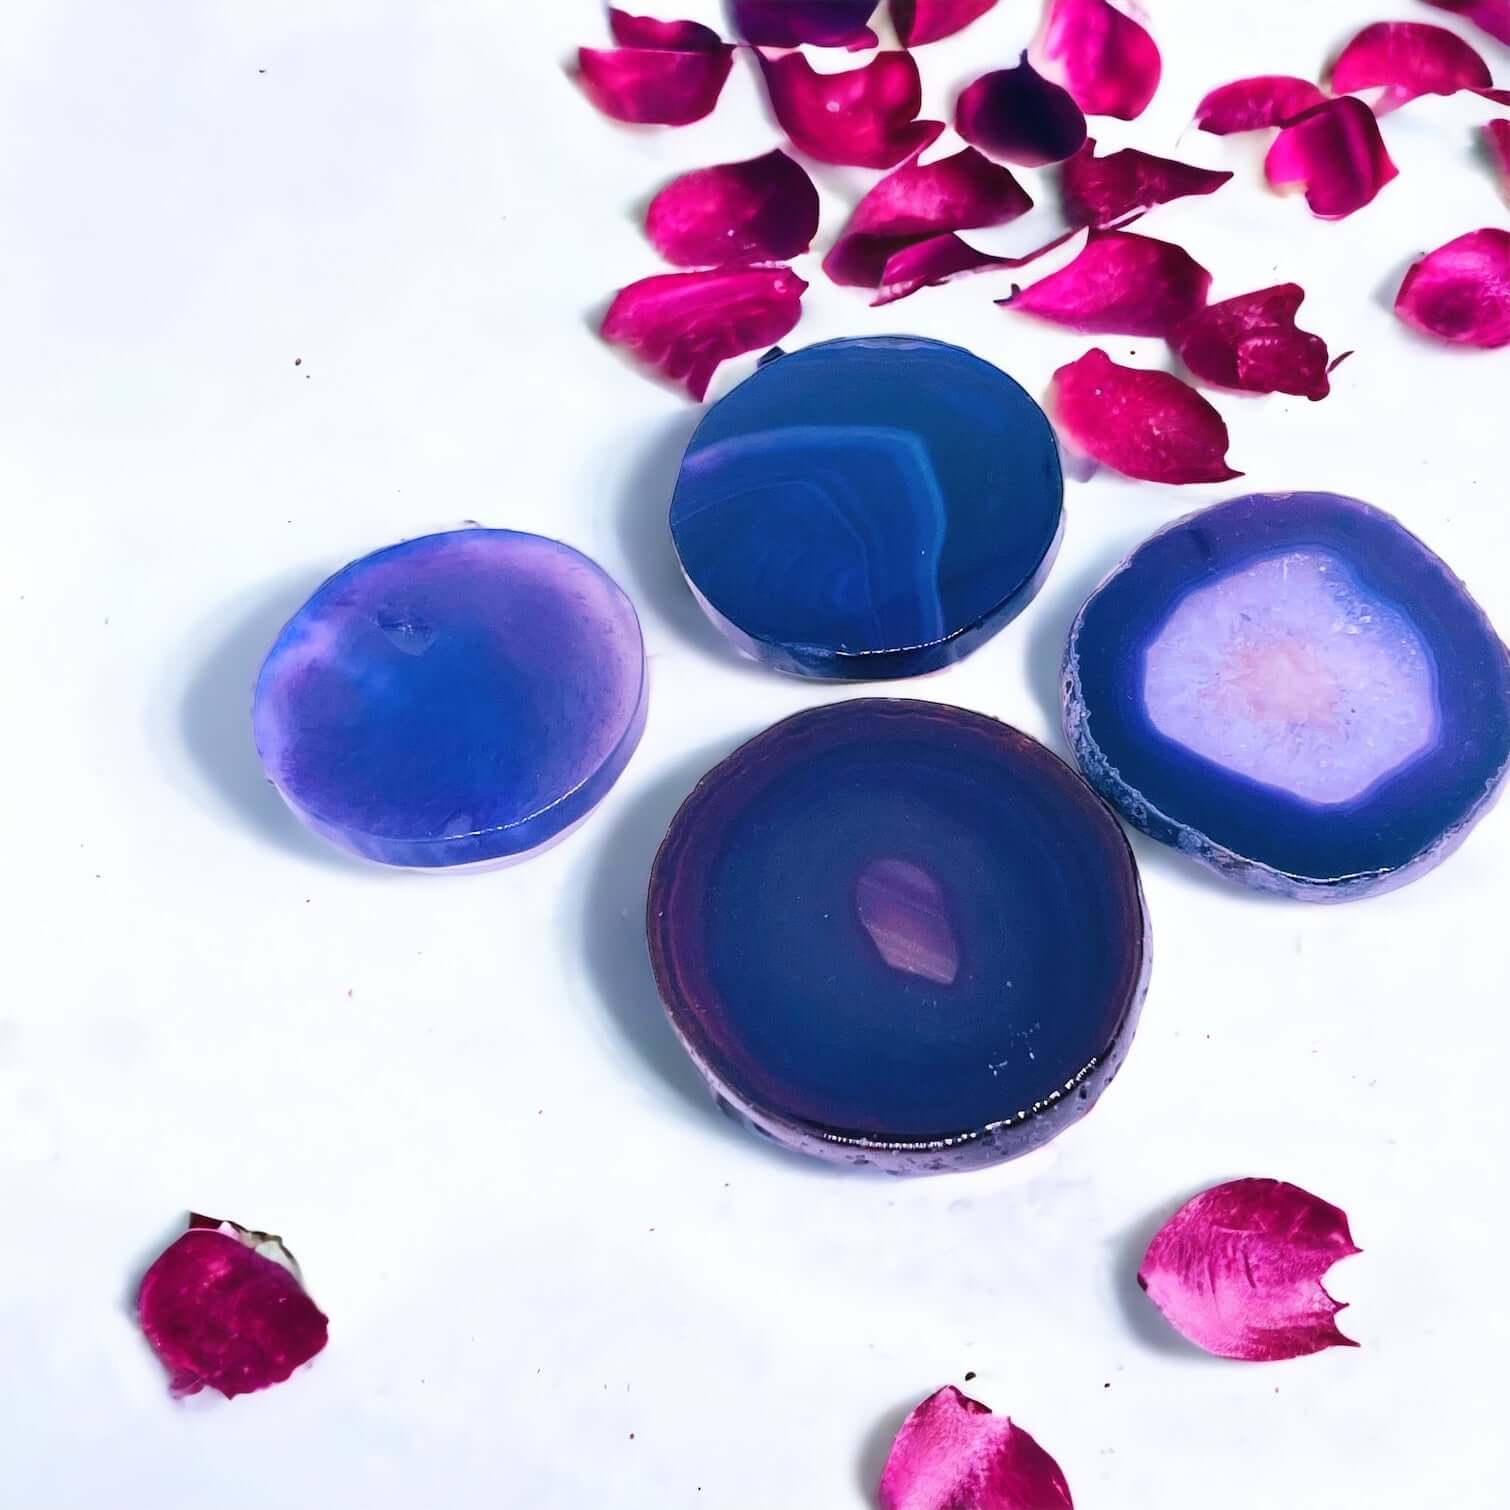 Purple agate pop socket phone holder with petals on white background